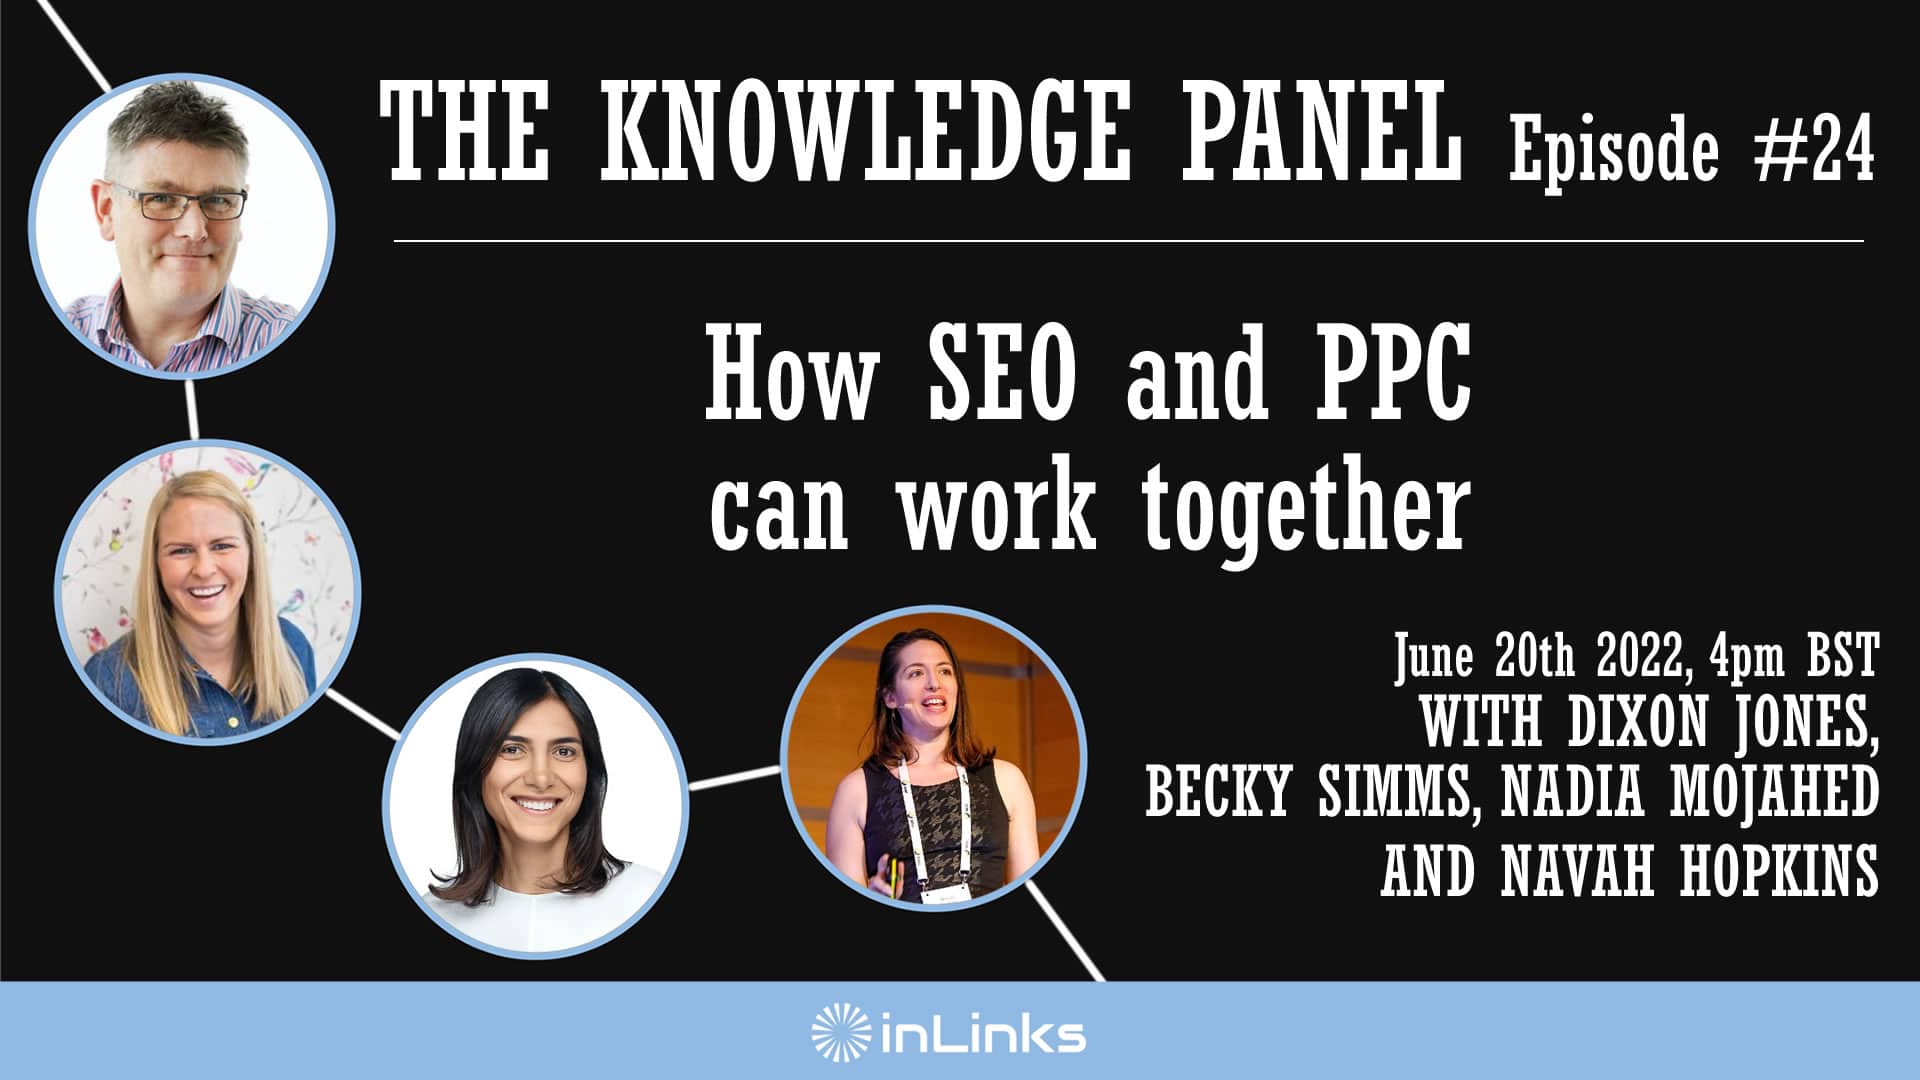 How SEO and PPC can work together?